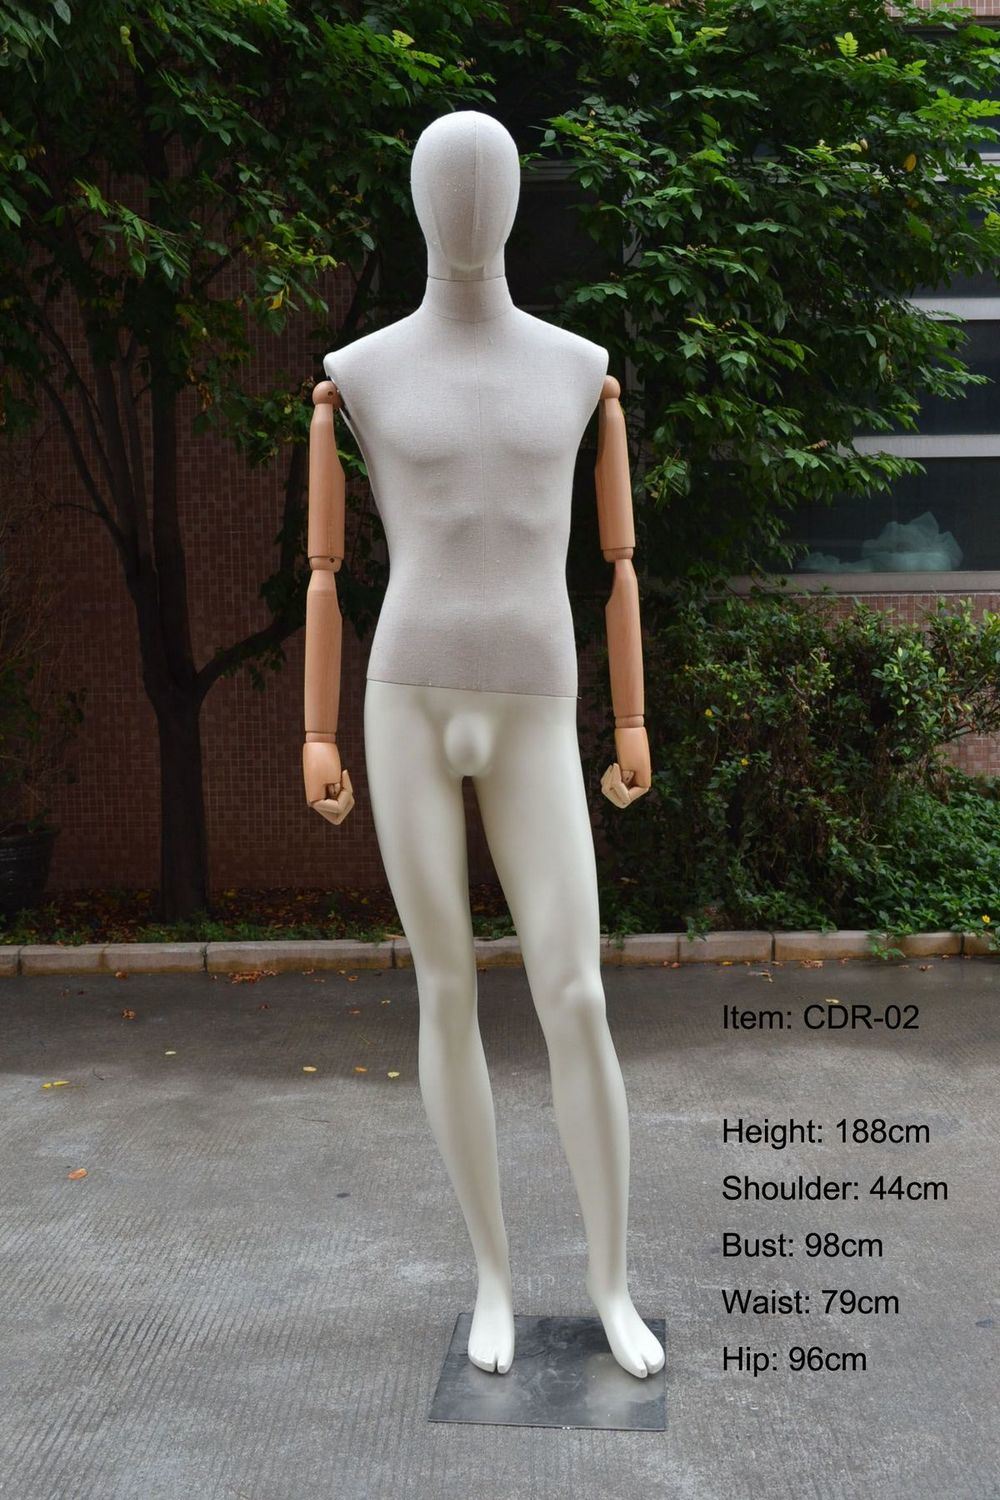 European Lifesize Male Mannequin Modern Fabric Cover Dummy